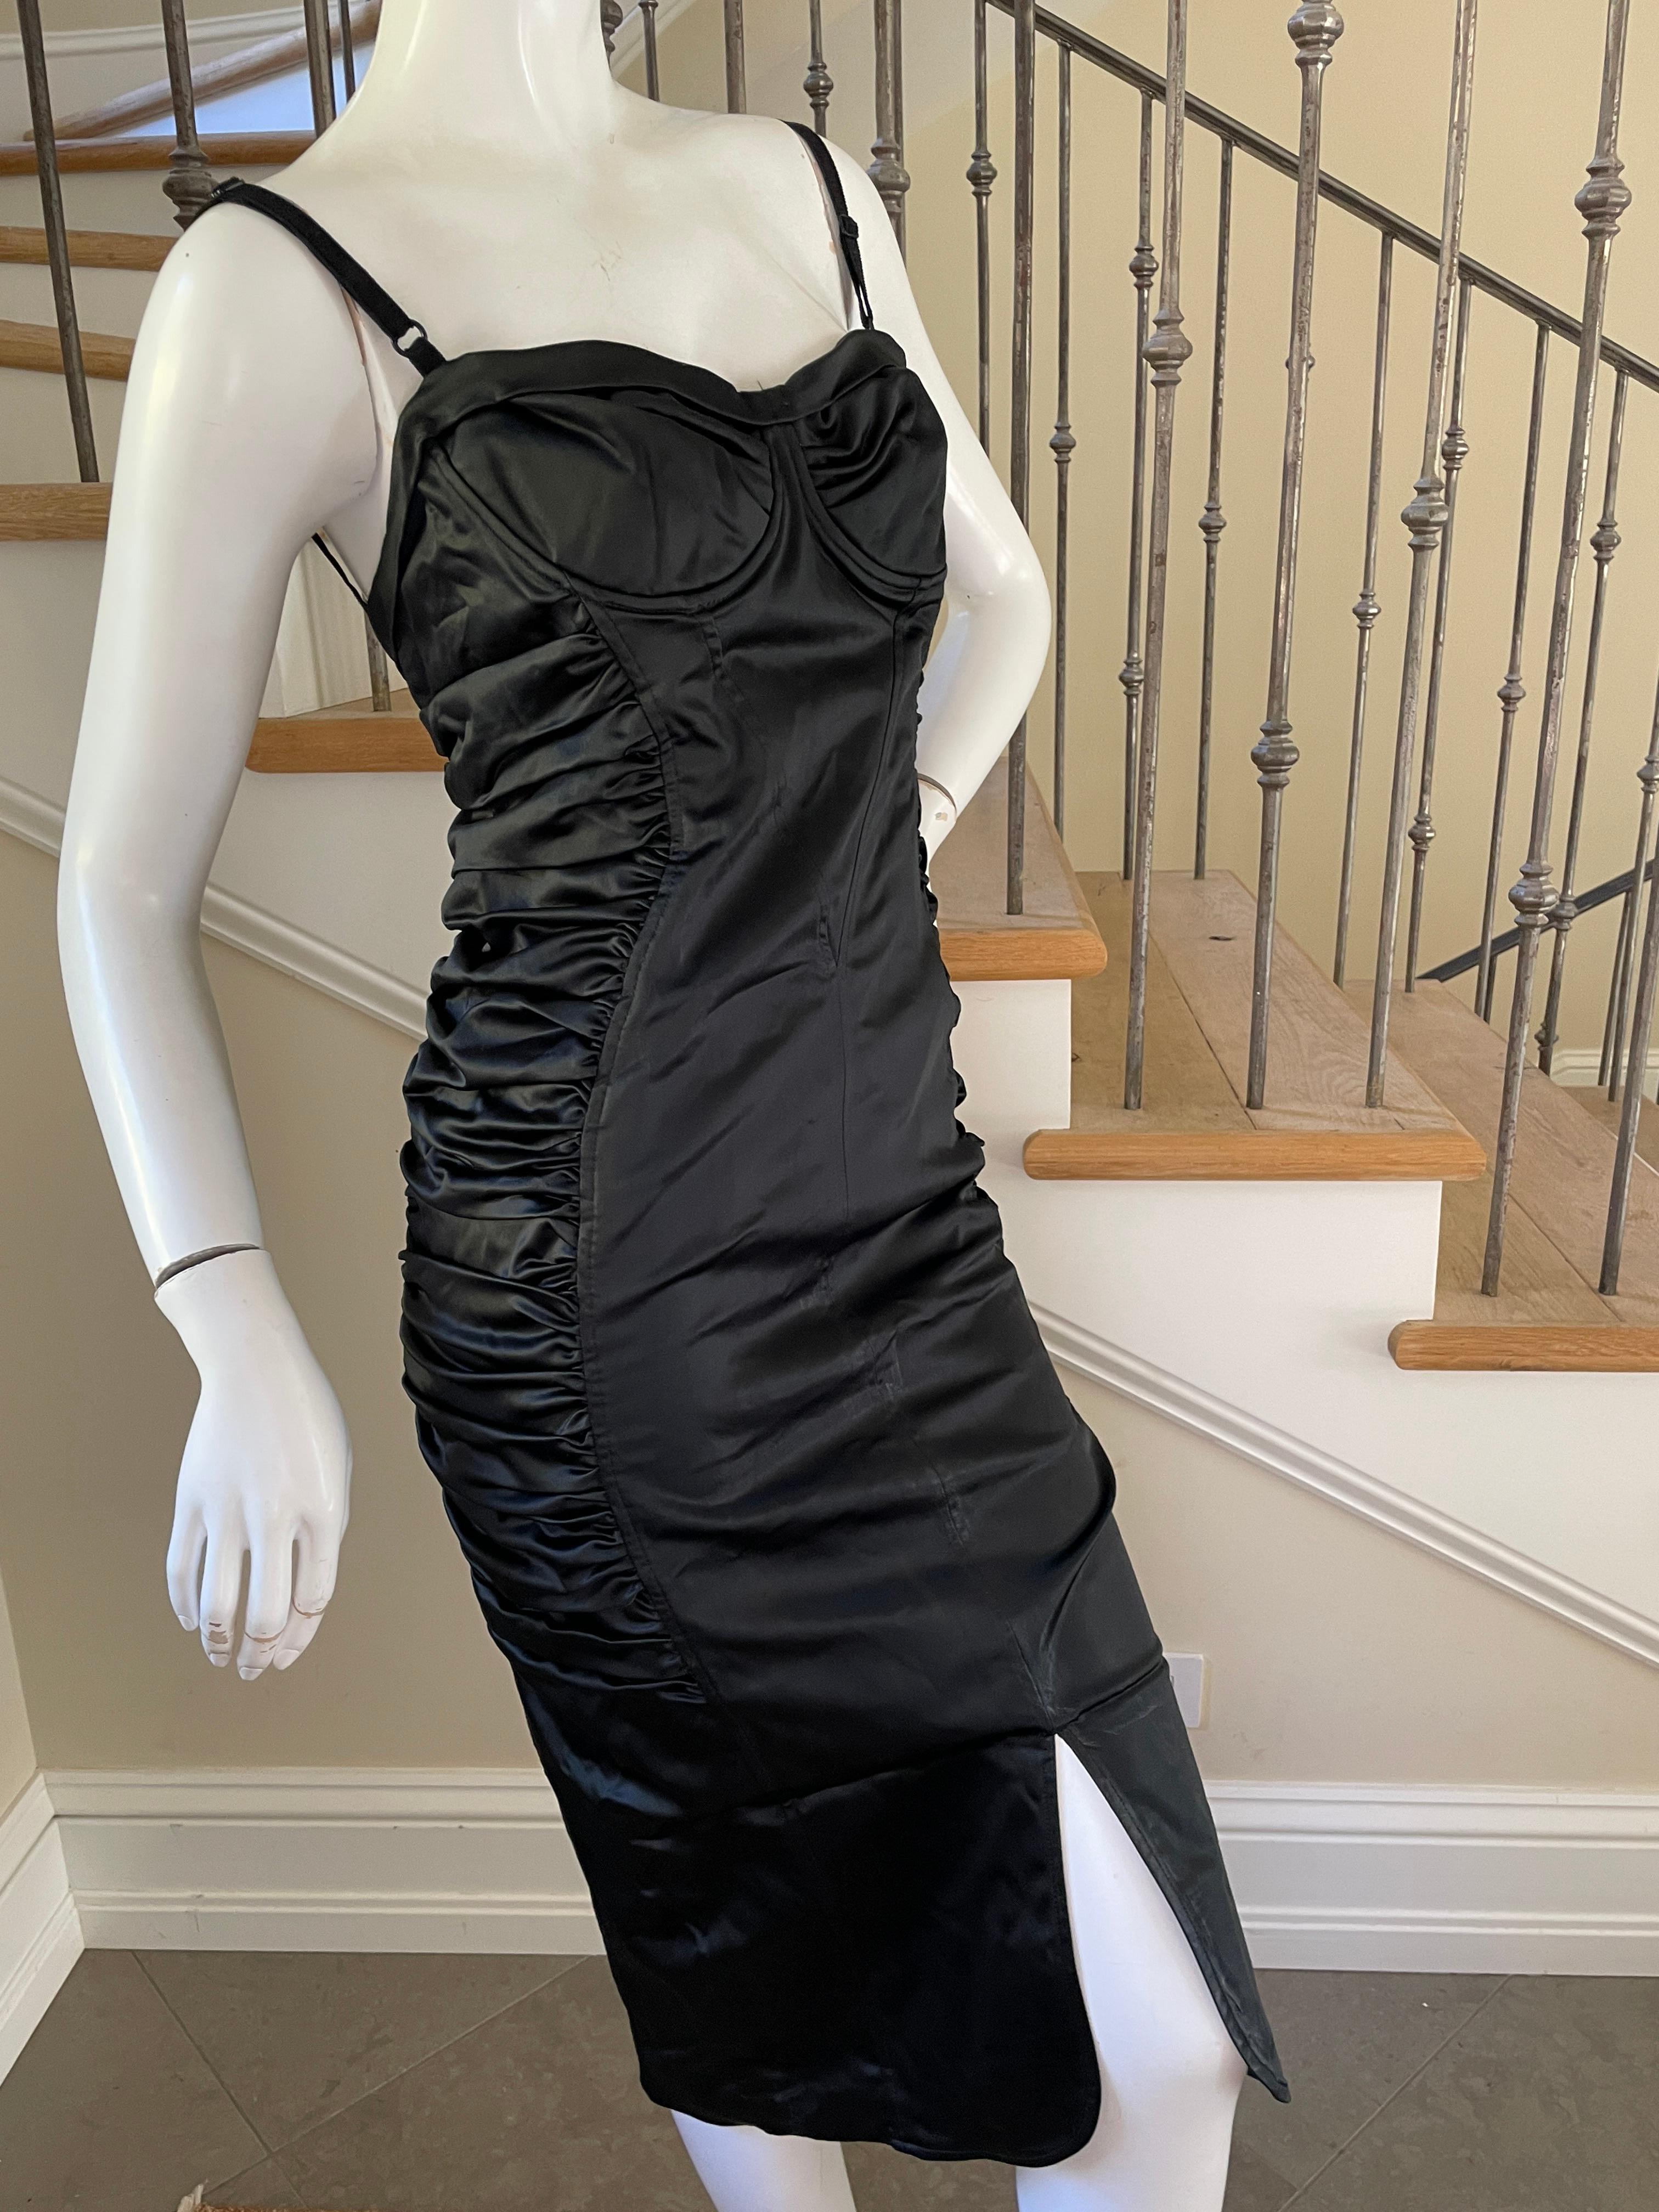 D&G by Dolce & Gabbana Vintage Black Ruched Cocktail Dress with Underwire Bra For Sale 2